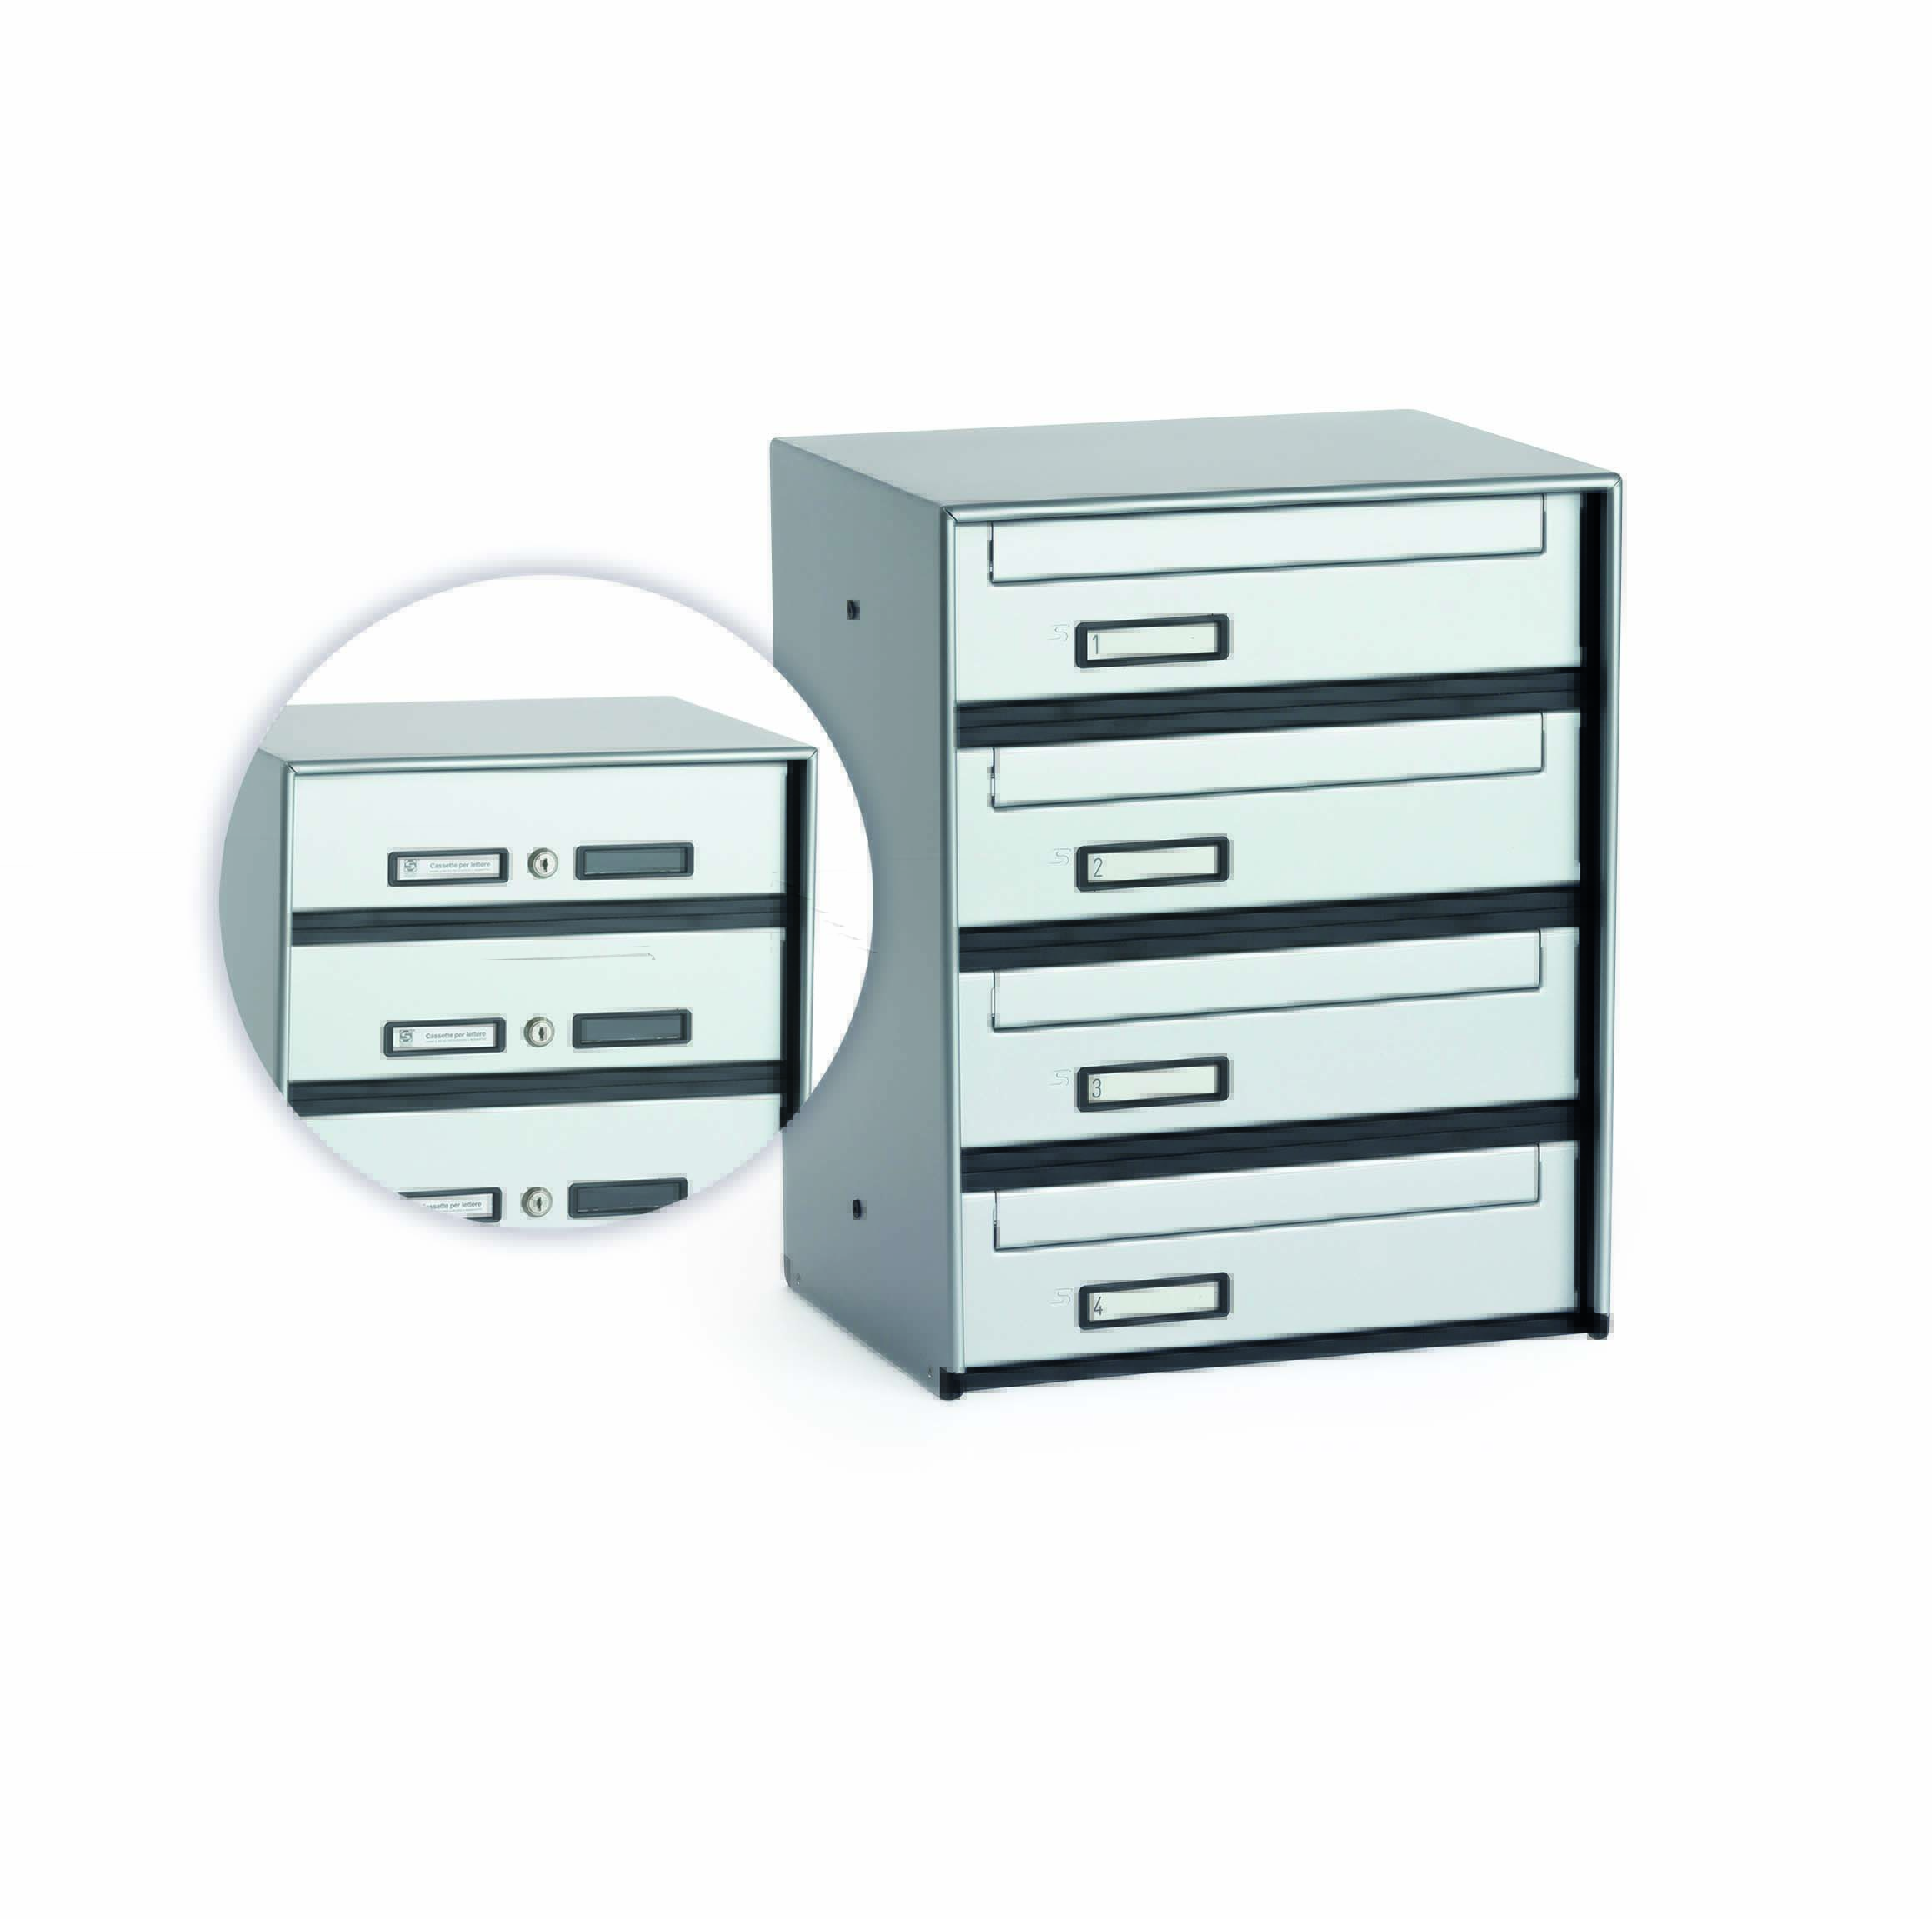 SC6 standard modular letterbox units with rear mail collection - 12 mailboxes